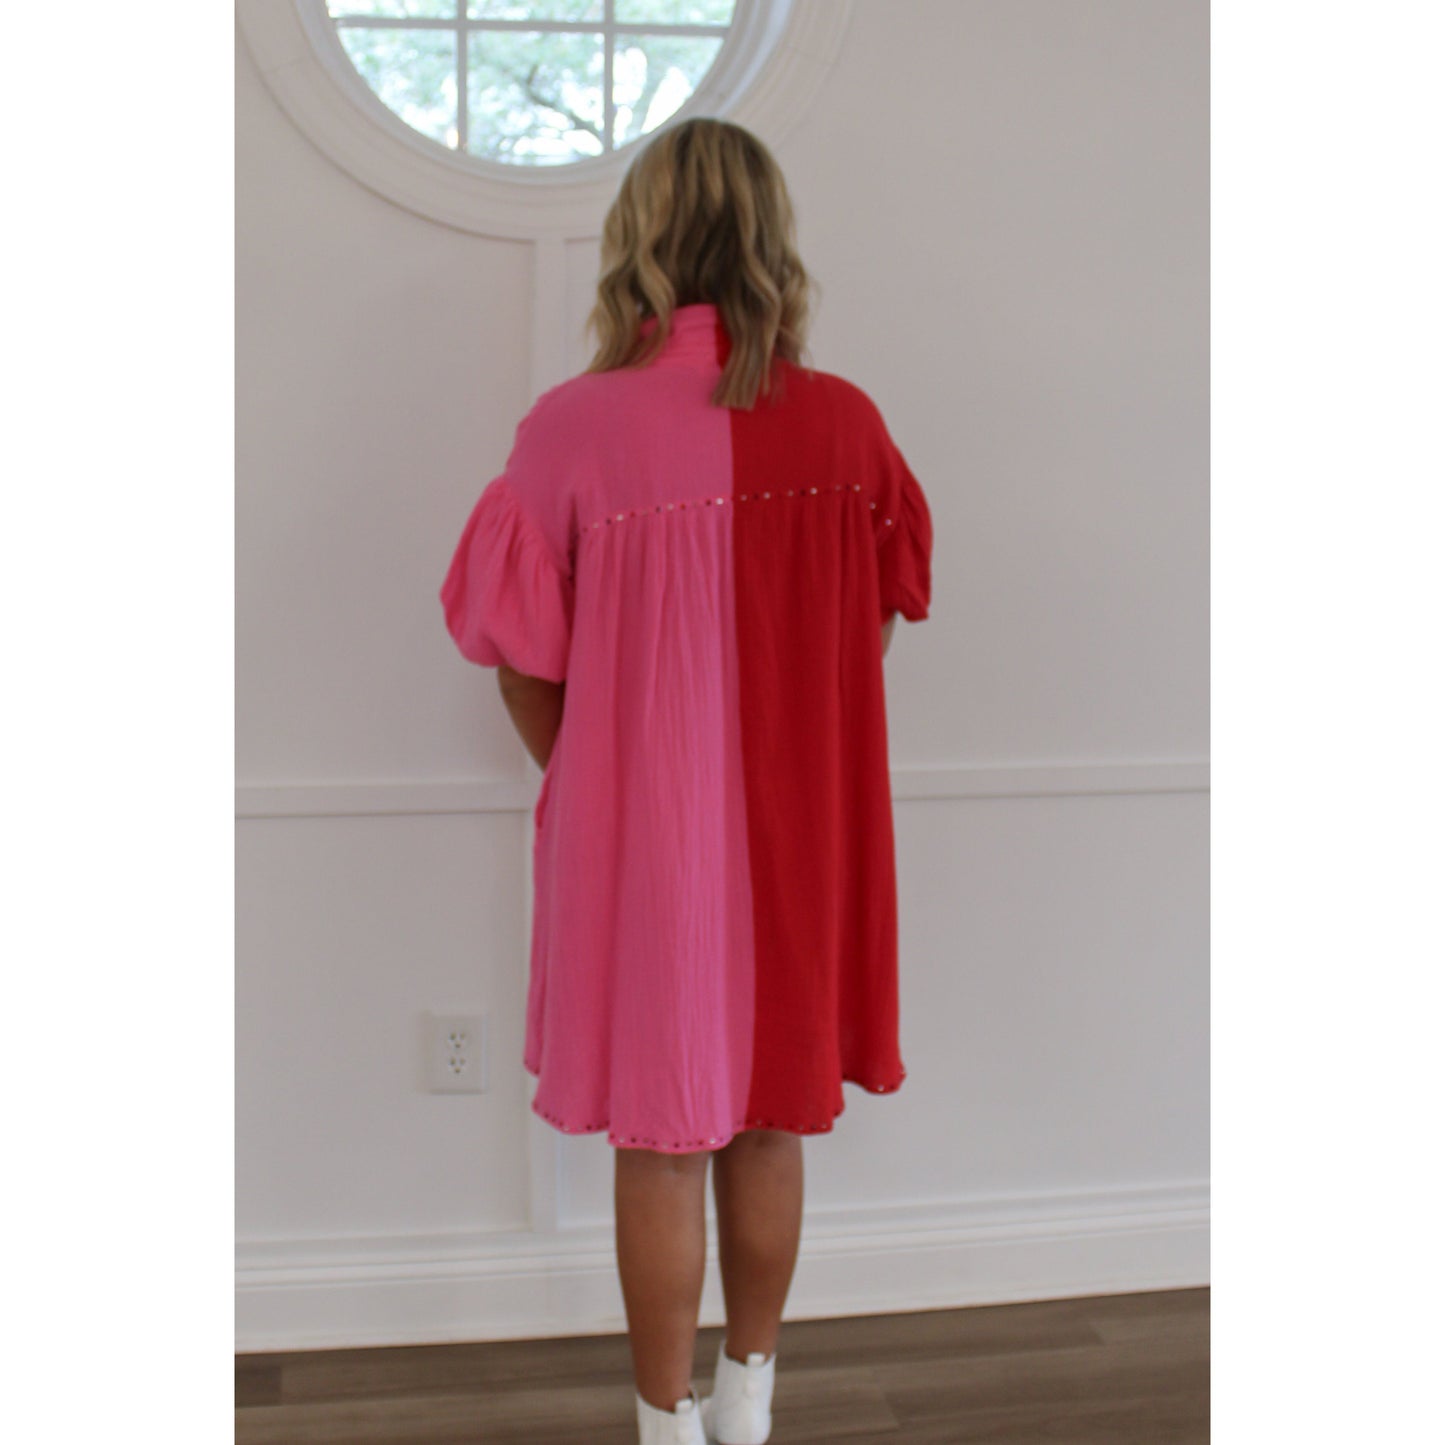 Hanna Color-Block Dress, Red/Pink